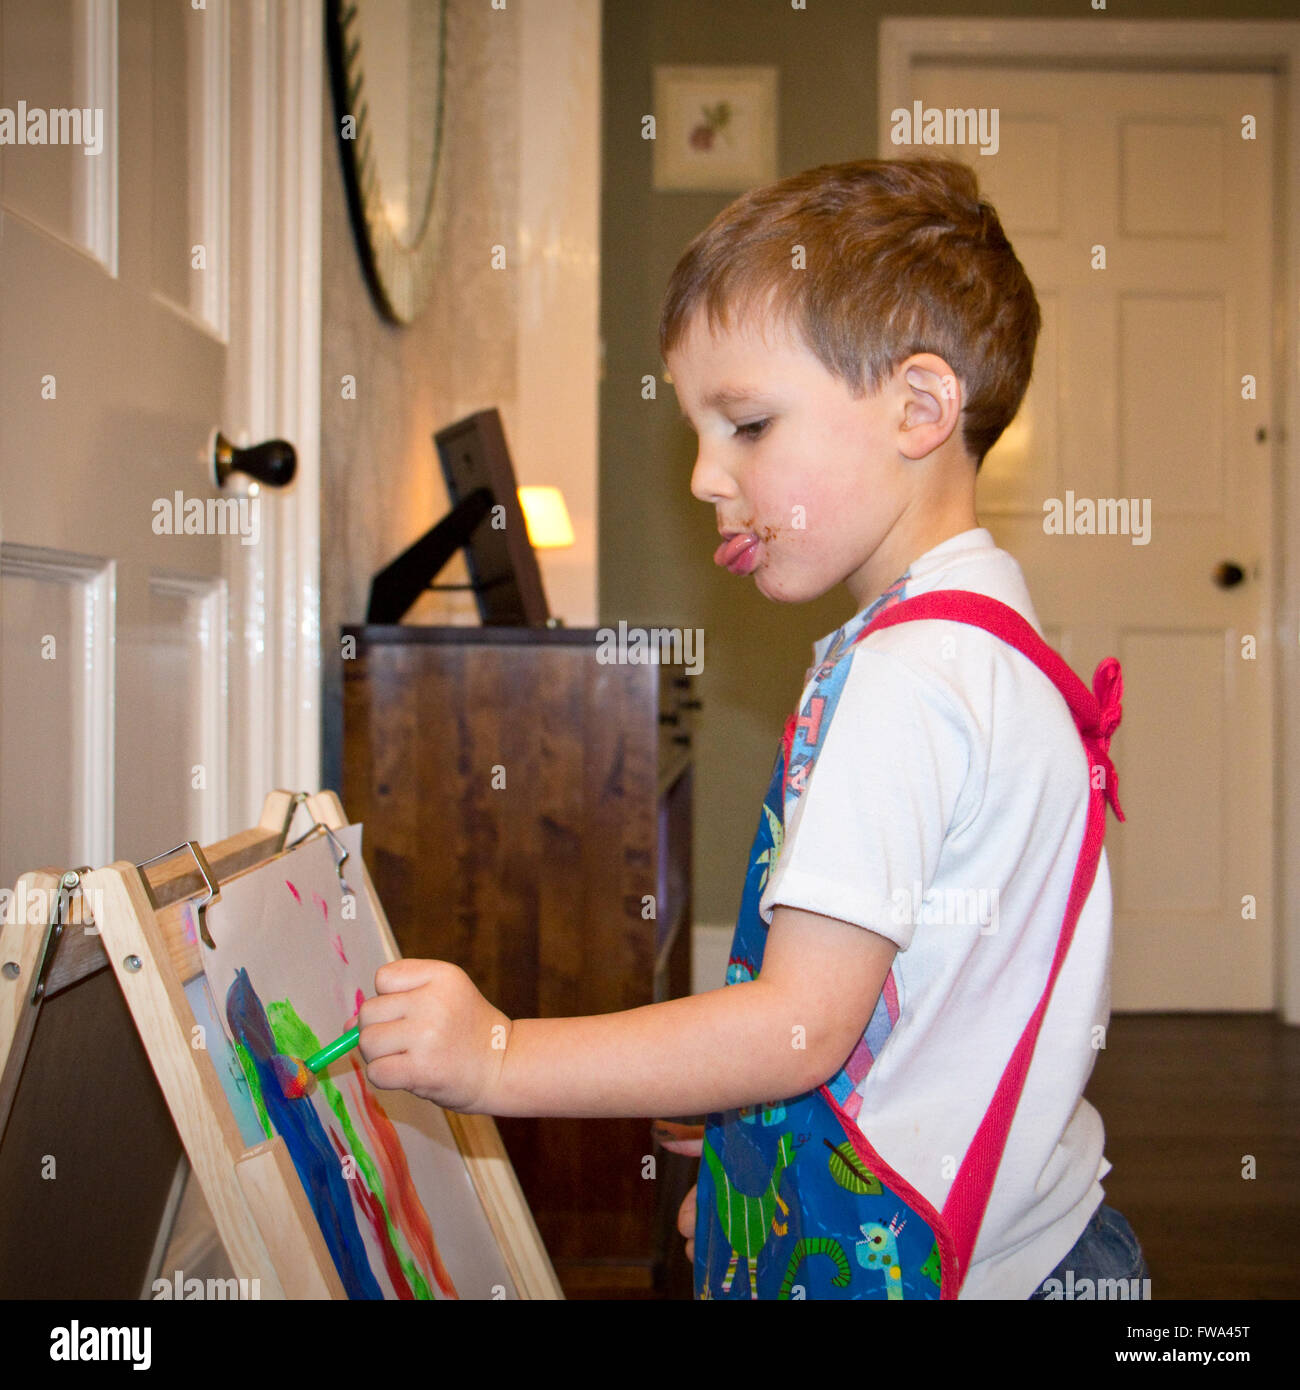 Child of 3 years old painting Stock Photo